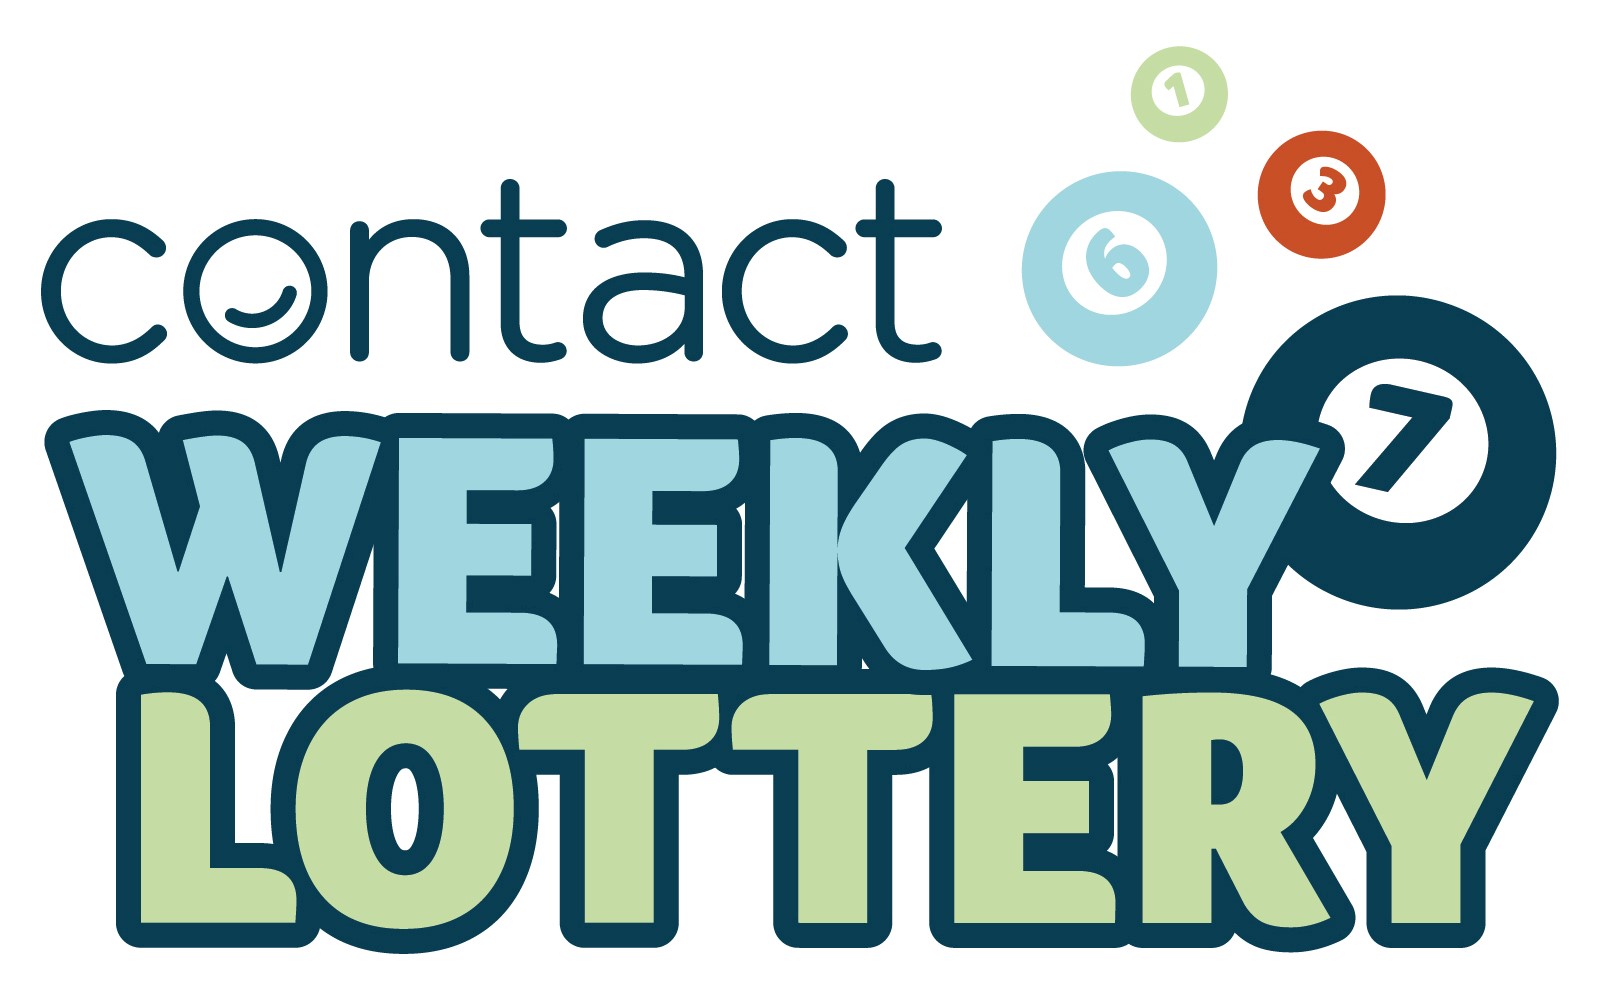 Contact weekly lottery logo - balls with numbers